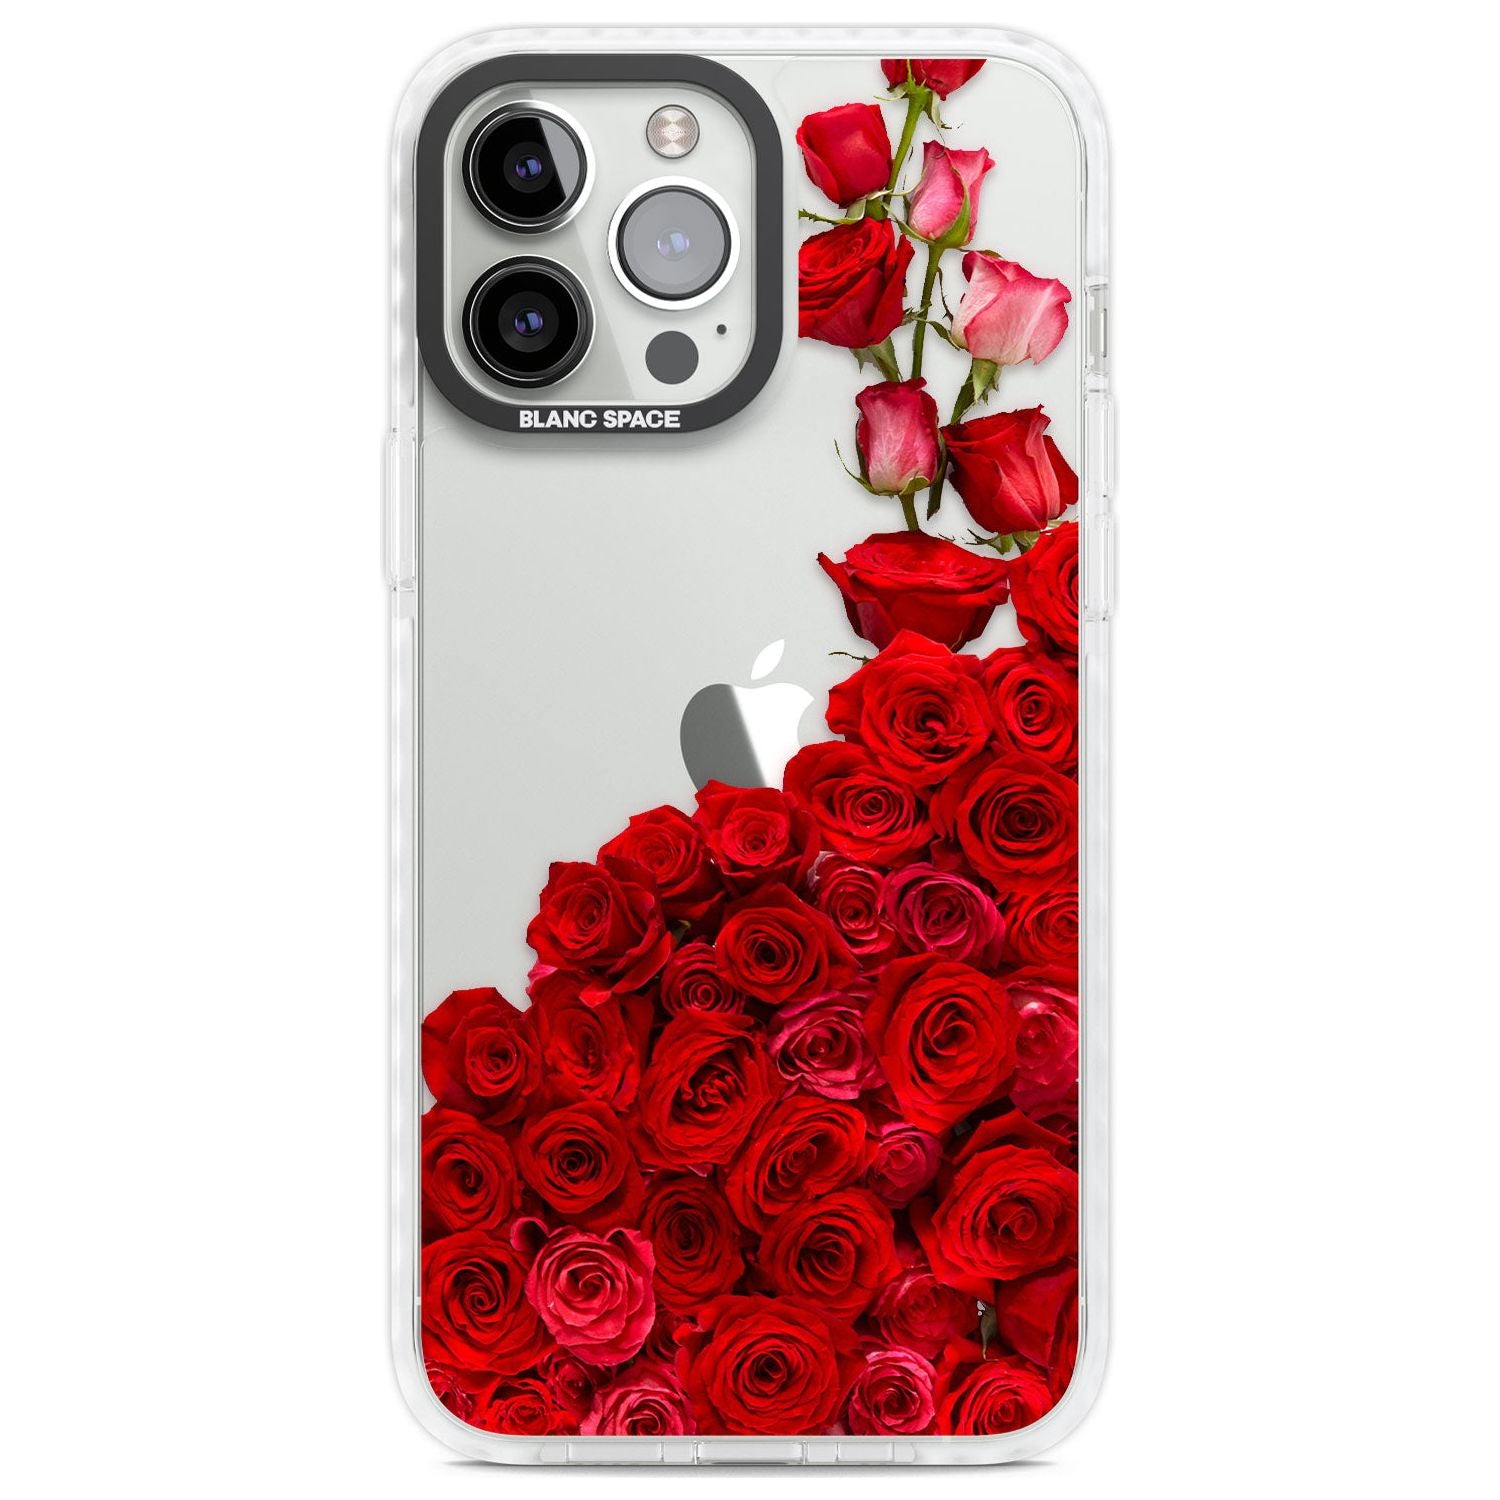 Floral Roses Phone Case iPhone 13 Pro Max / Impact Case,iPhone 14 Pro Max / Impact Case Blanc Space